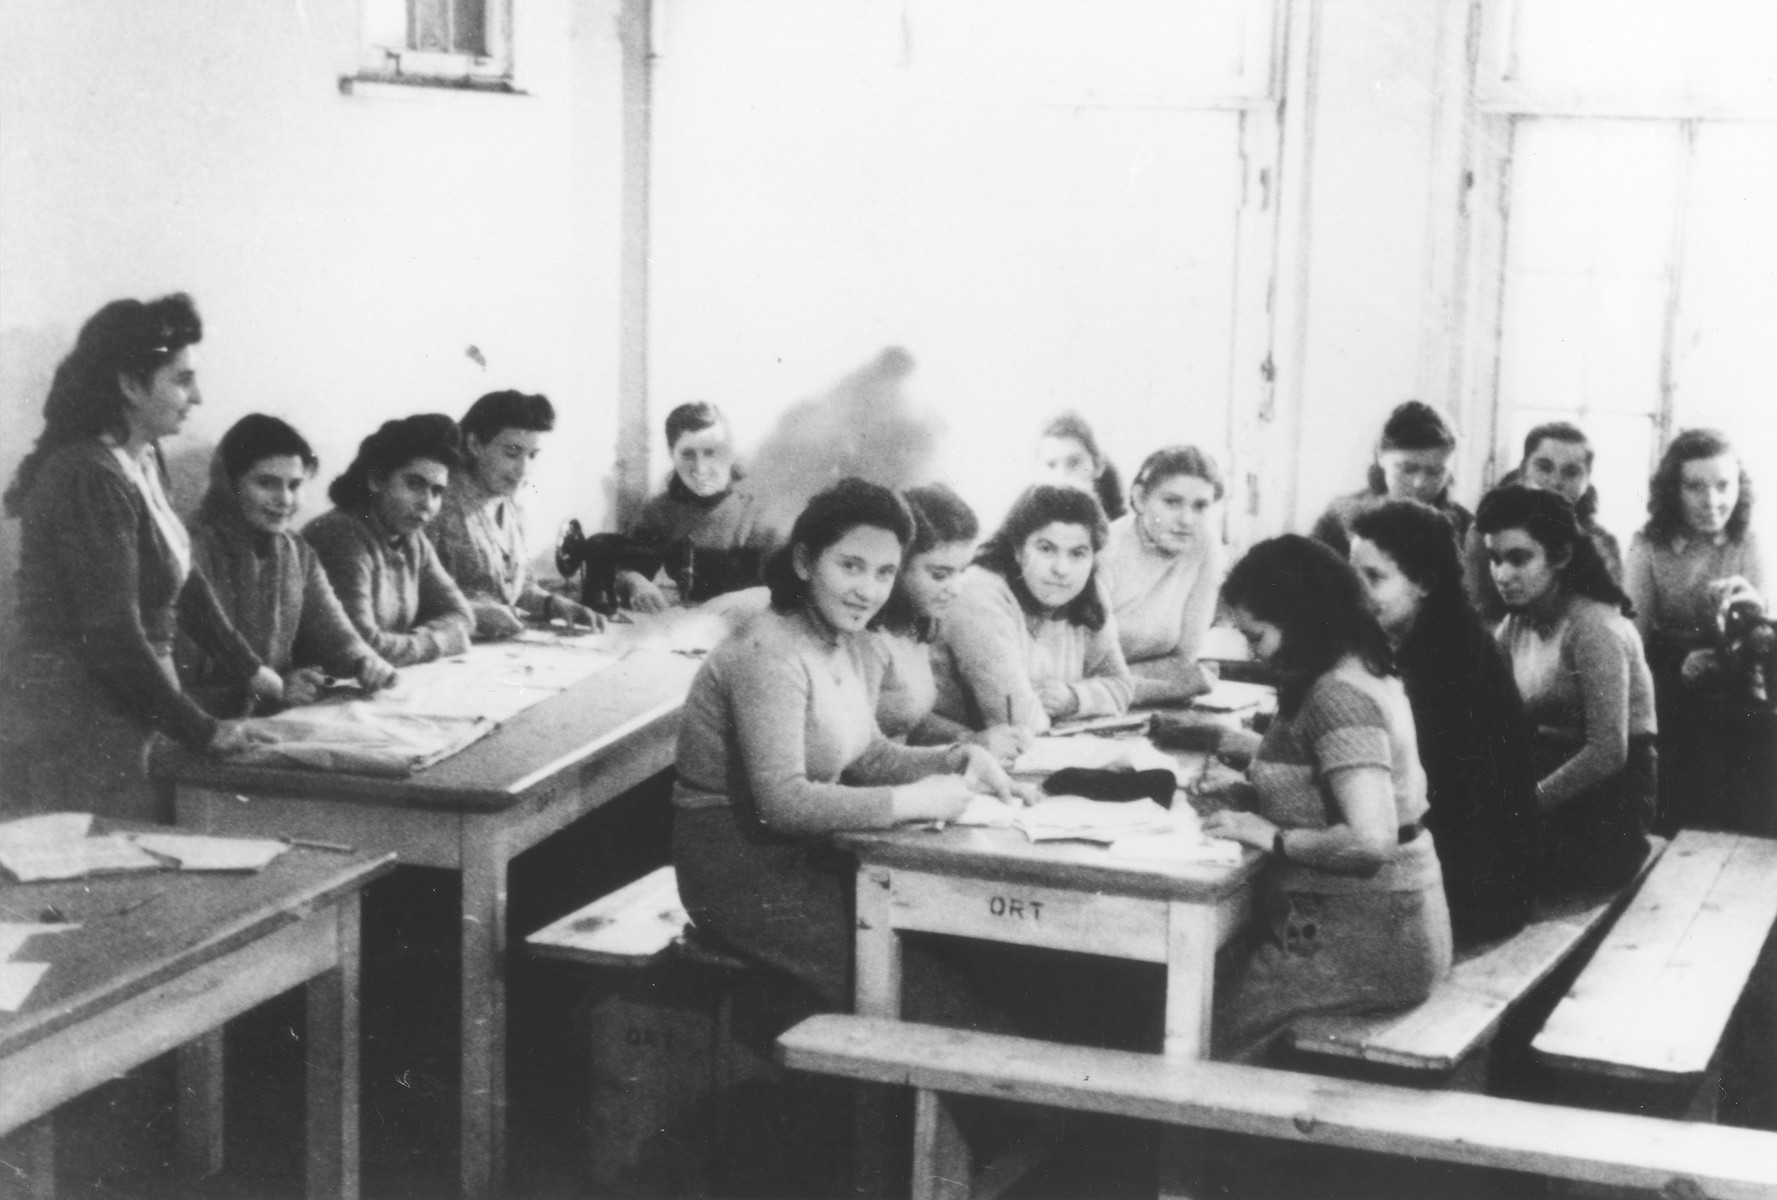 Young women attend a sewing class at the ORT school in the Schauenstein displaced persons camp for children.